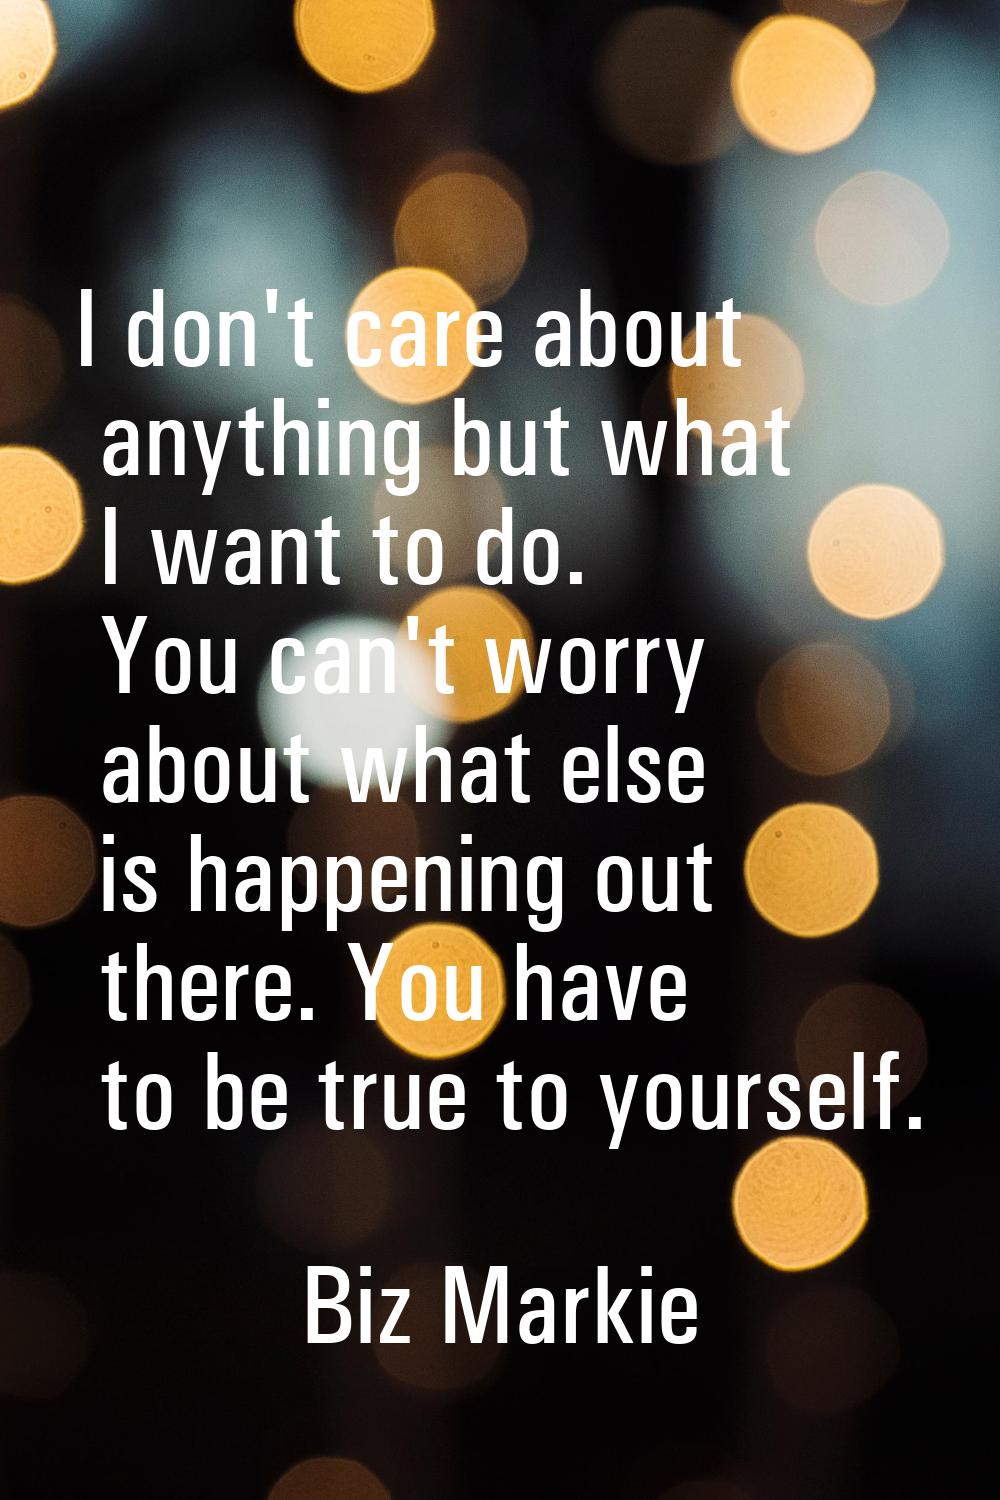 I don't care about anything but what I want to do. You can't worry about what else is happening out